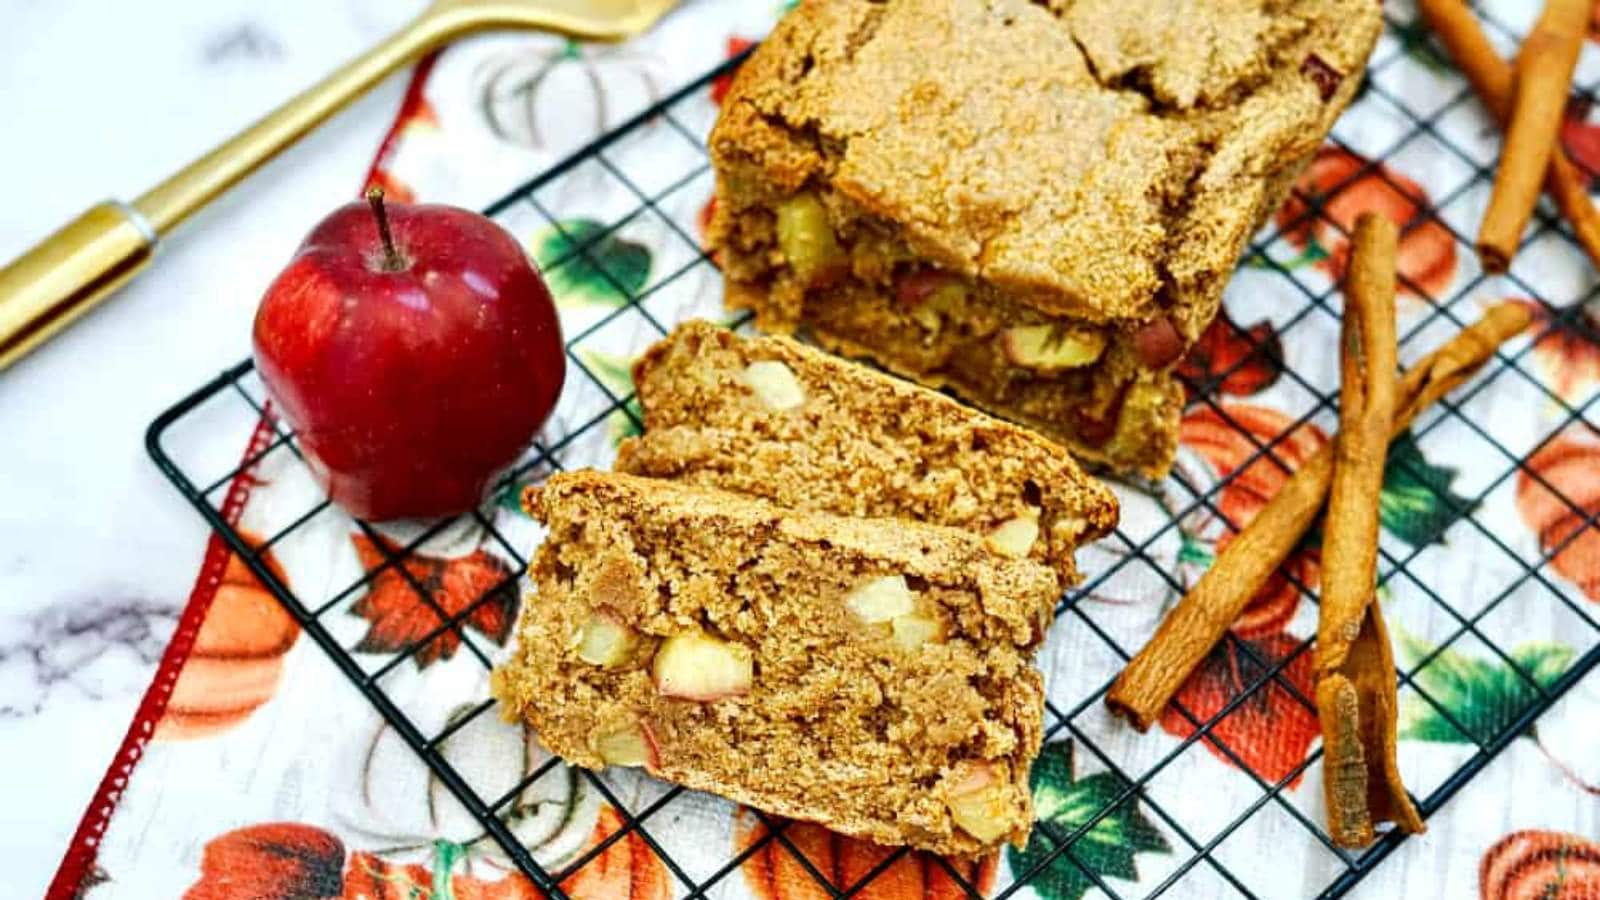 Apple Spice Bread recipe by Two Kids And A Coupon.
